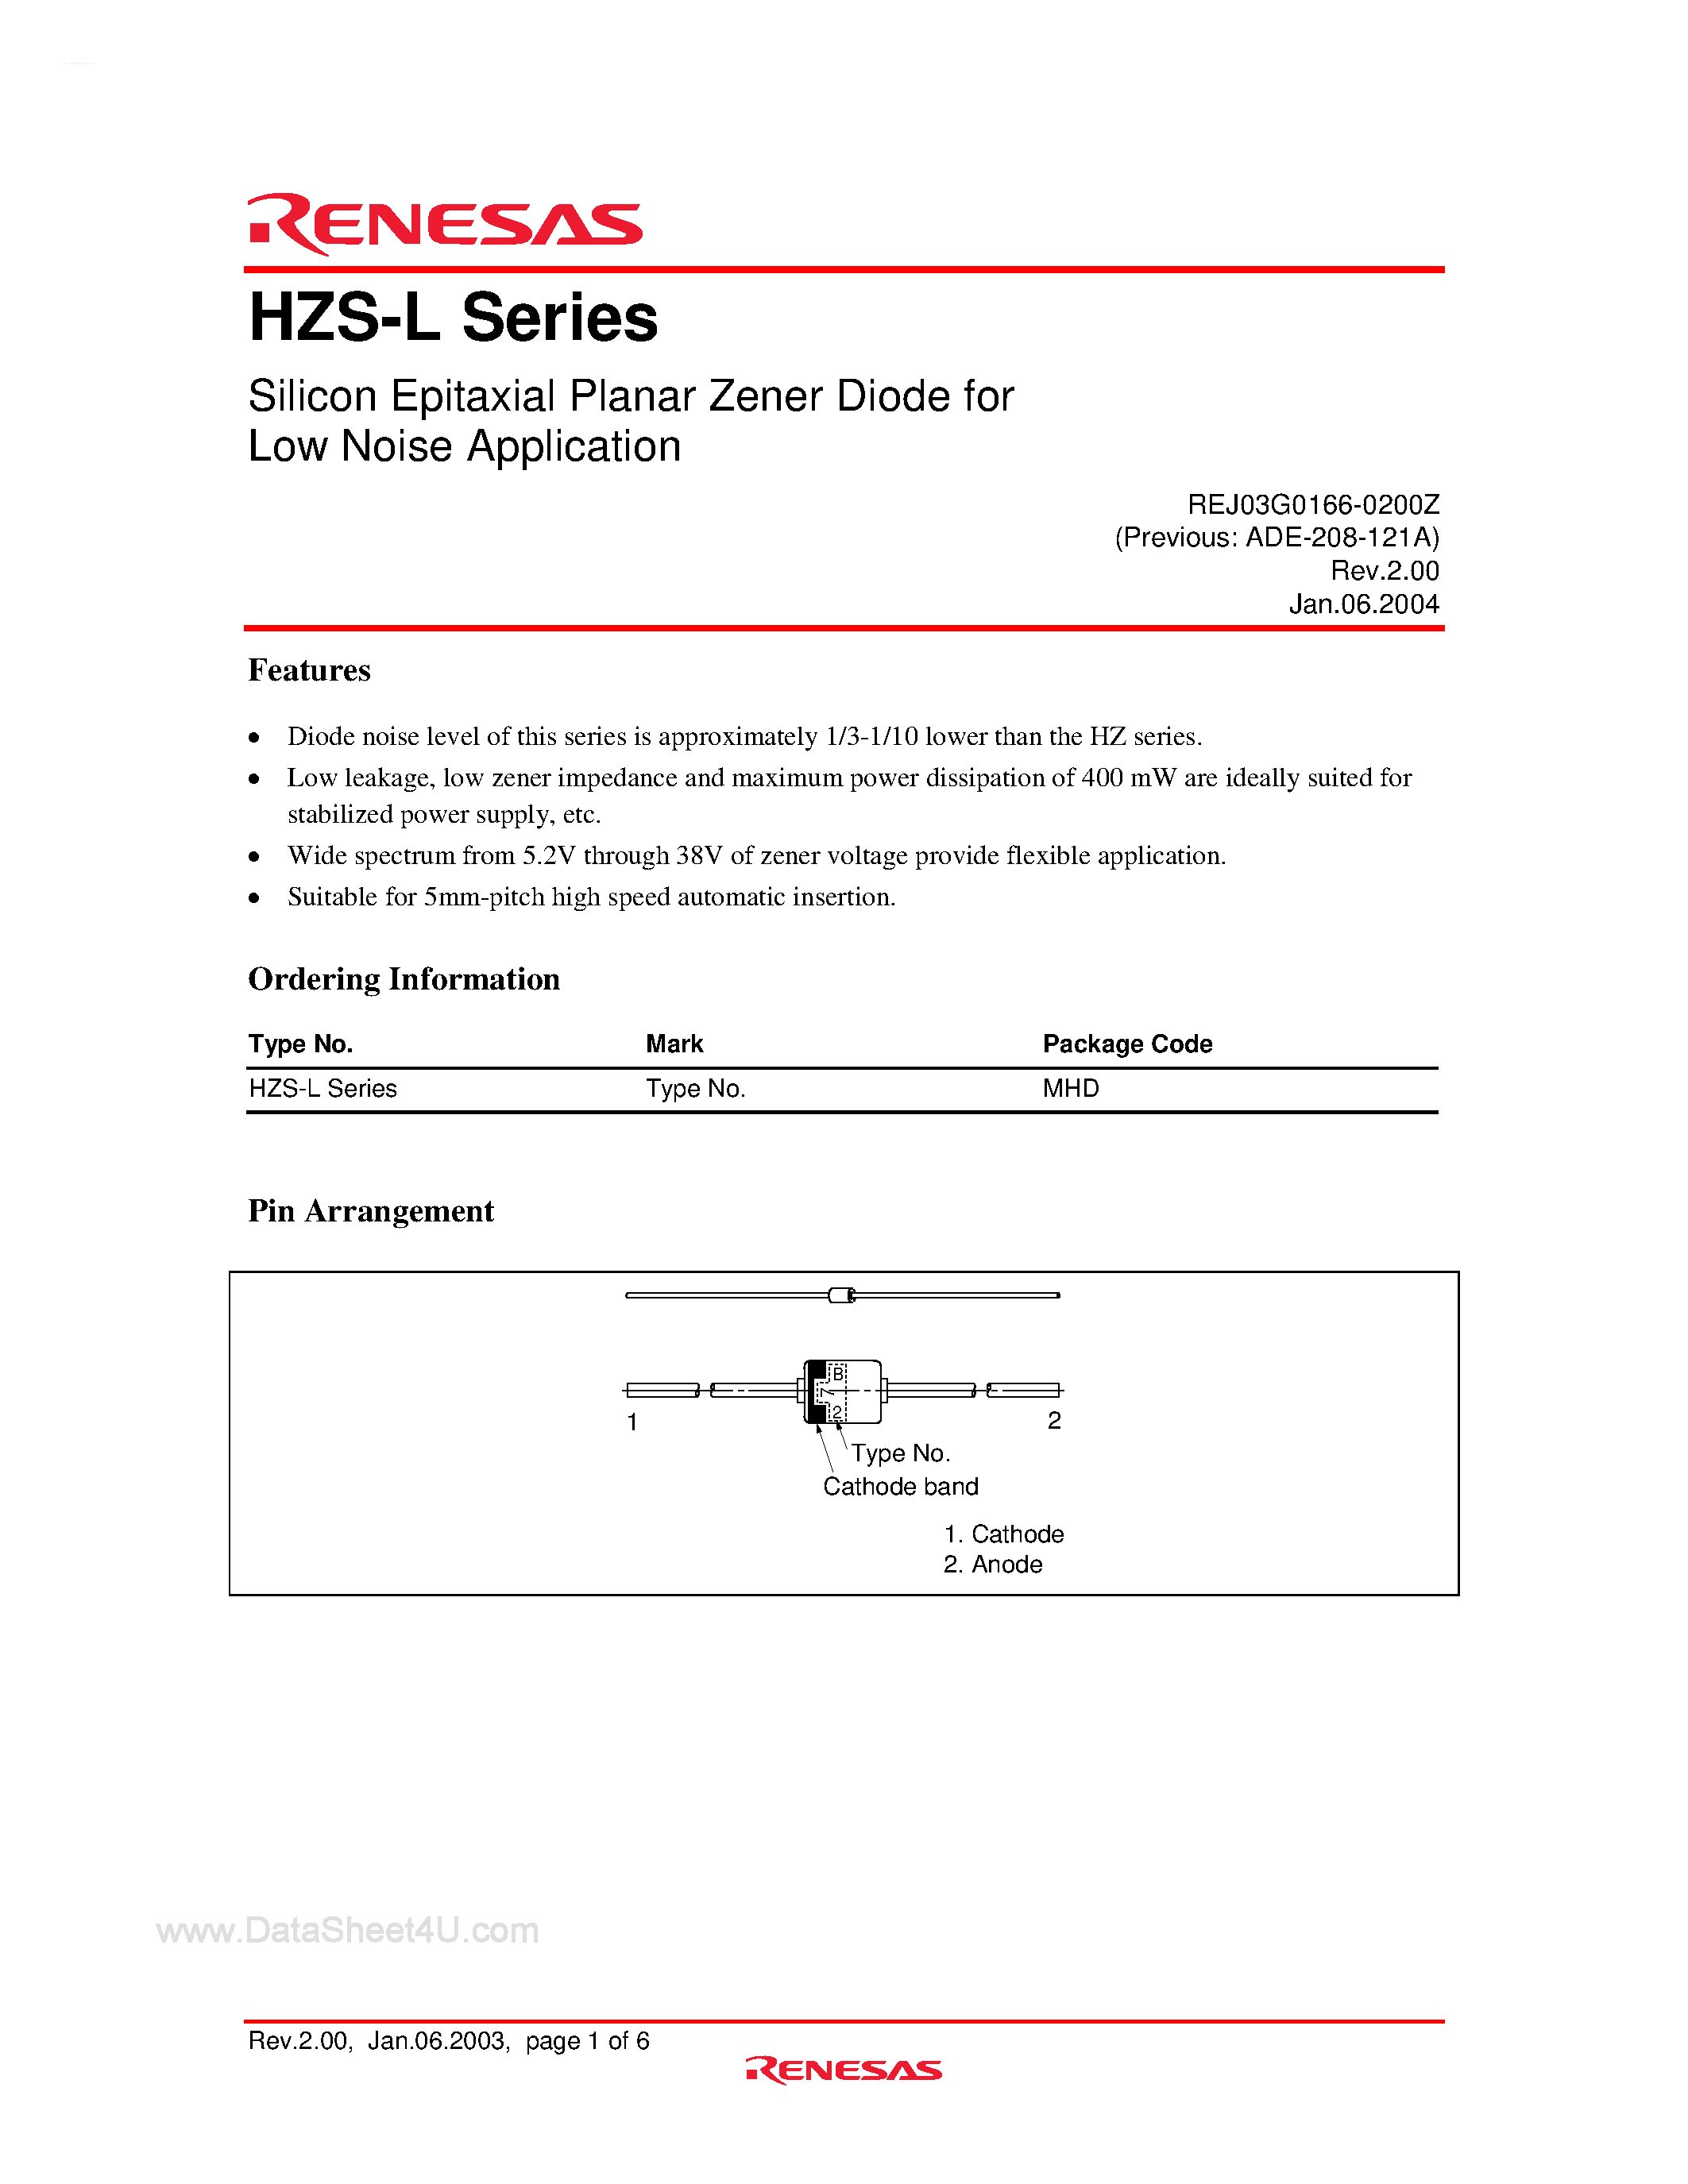 Даташит HZS-L-(HZS-L Series) Silicon Epitaxial Planar Zener Diode for Low Noise Application страница 1